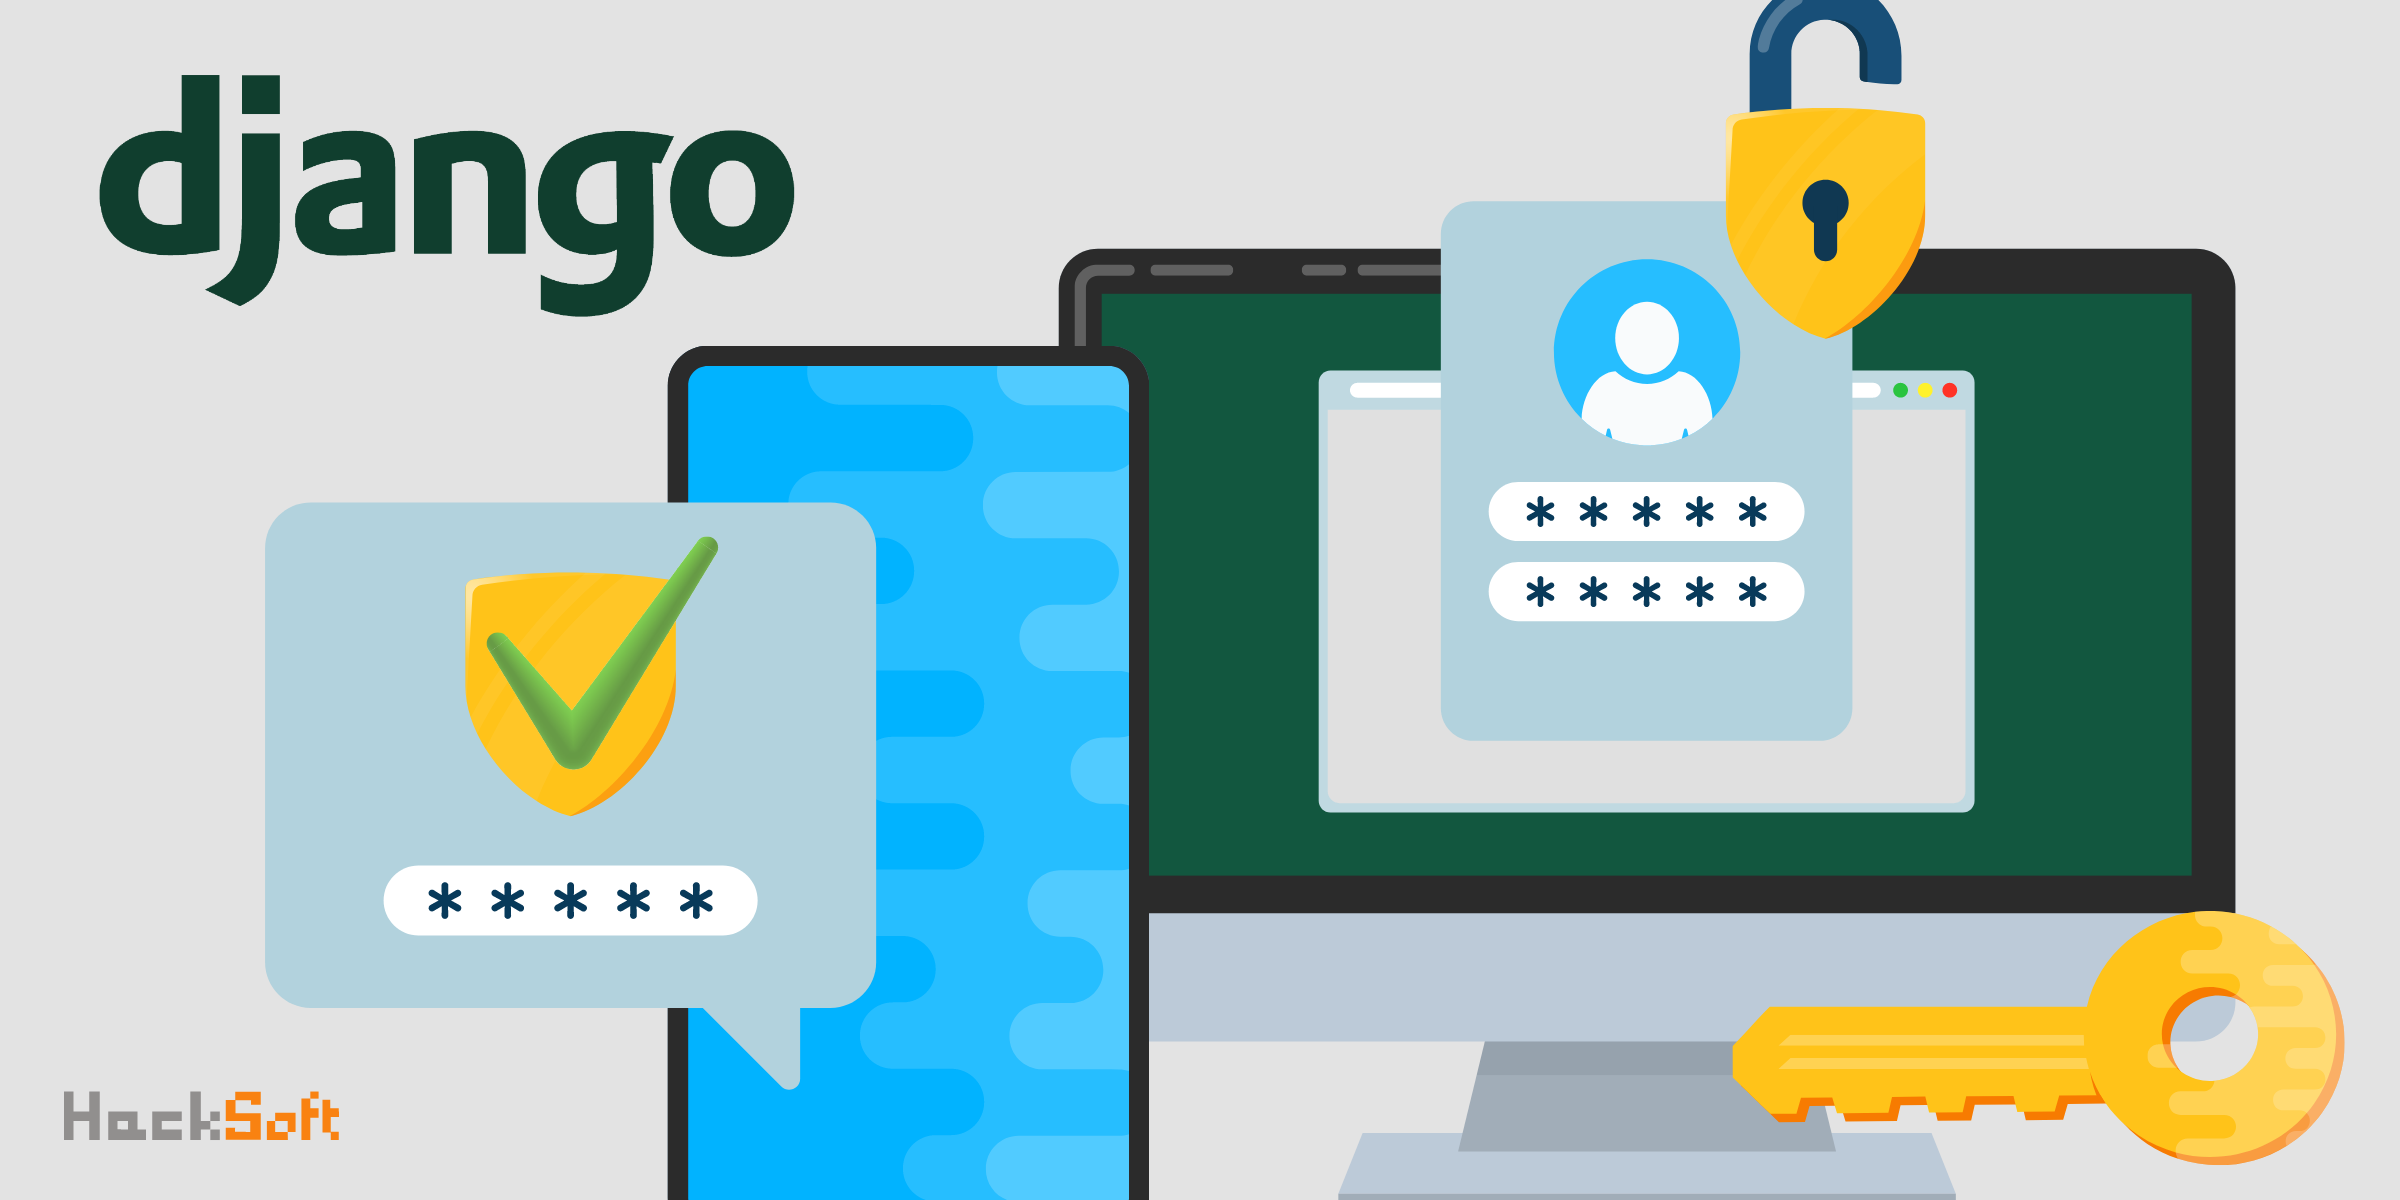 Adding required two-factor authentication (2FA) to the Django admin